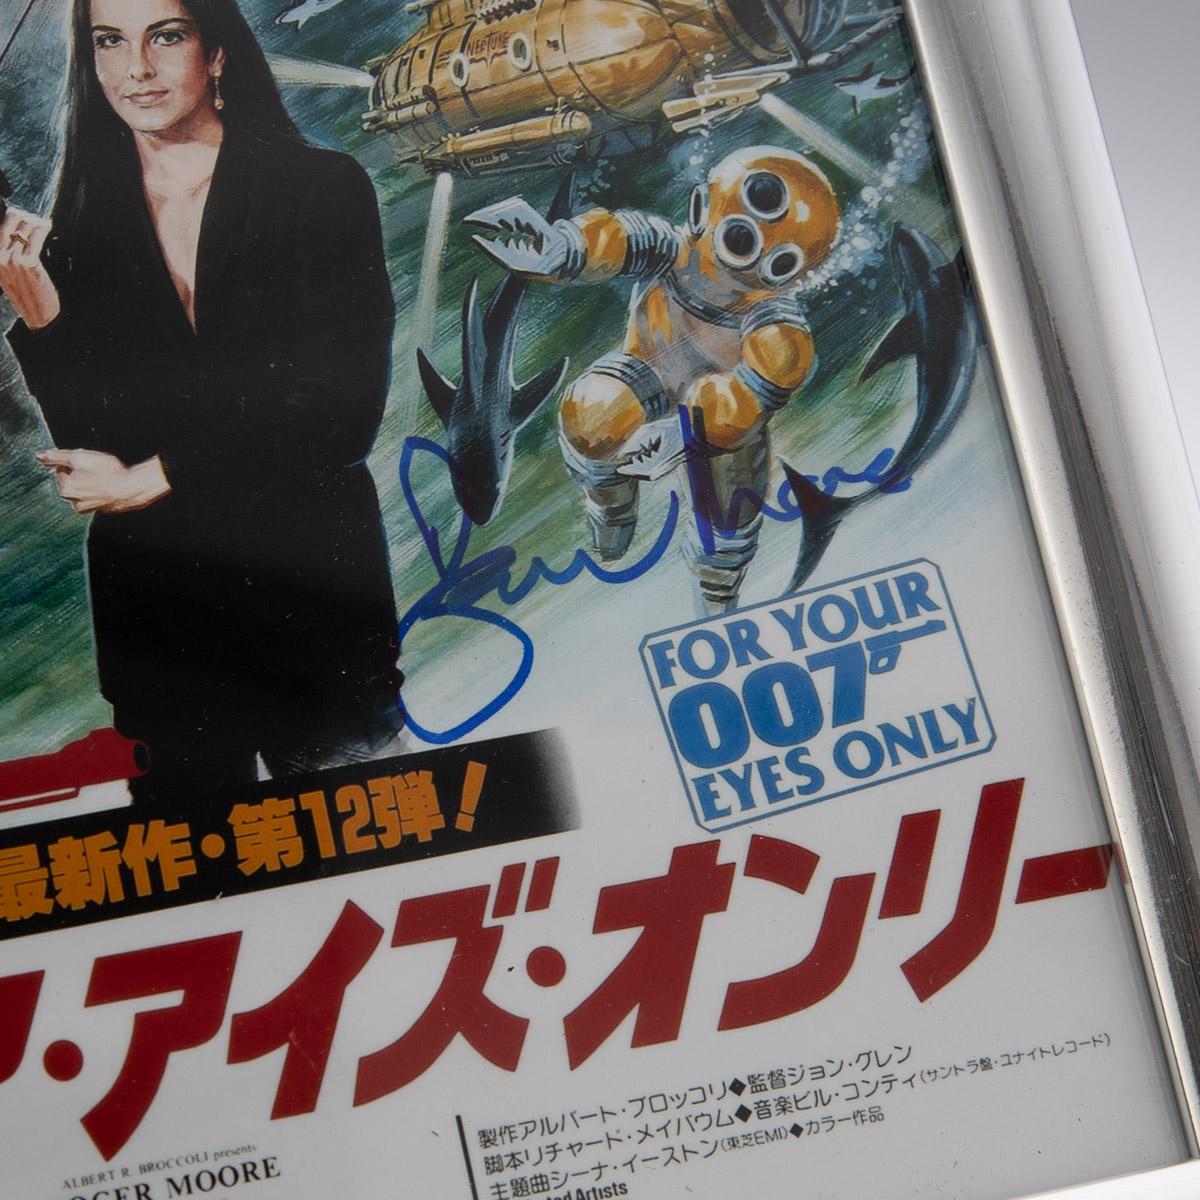 Original Japanese Signed By Roger Moore 'For Your Eyes Only' Mini Poster For Sale 1